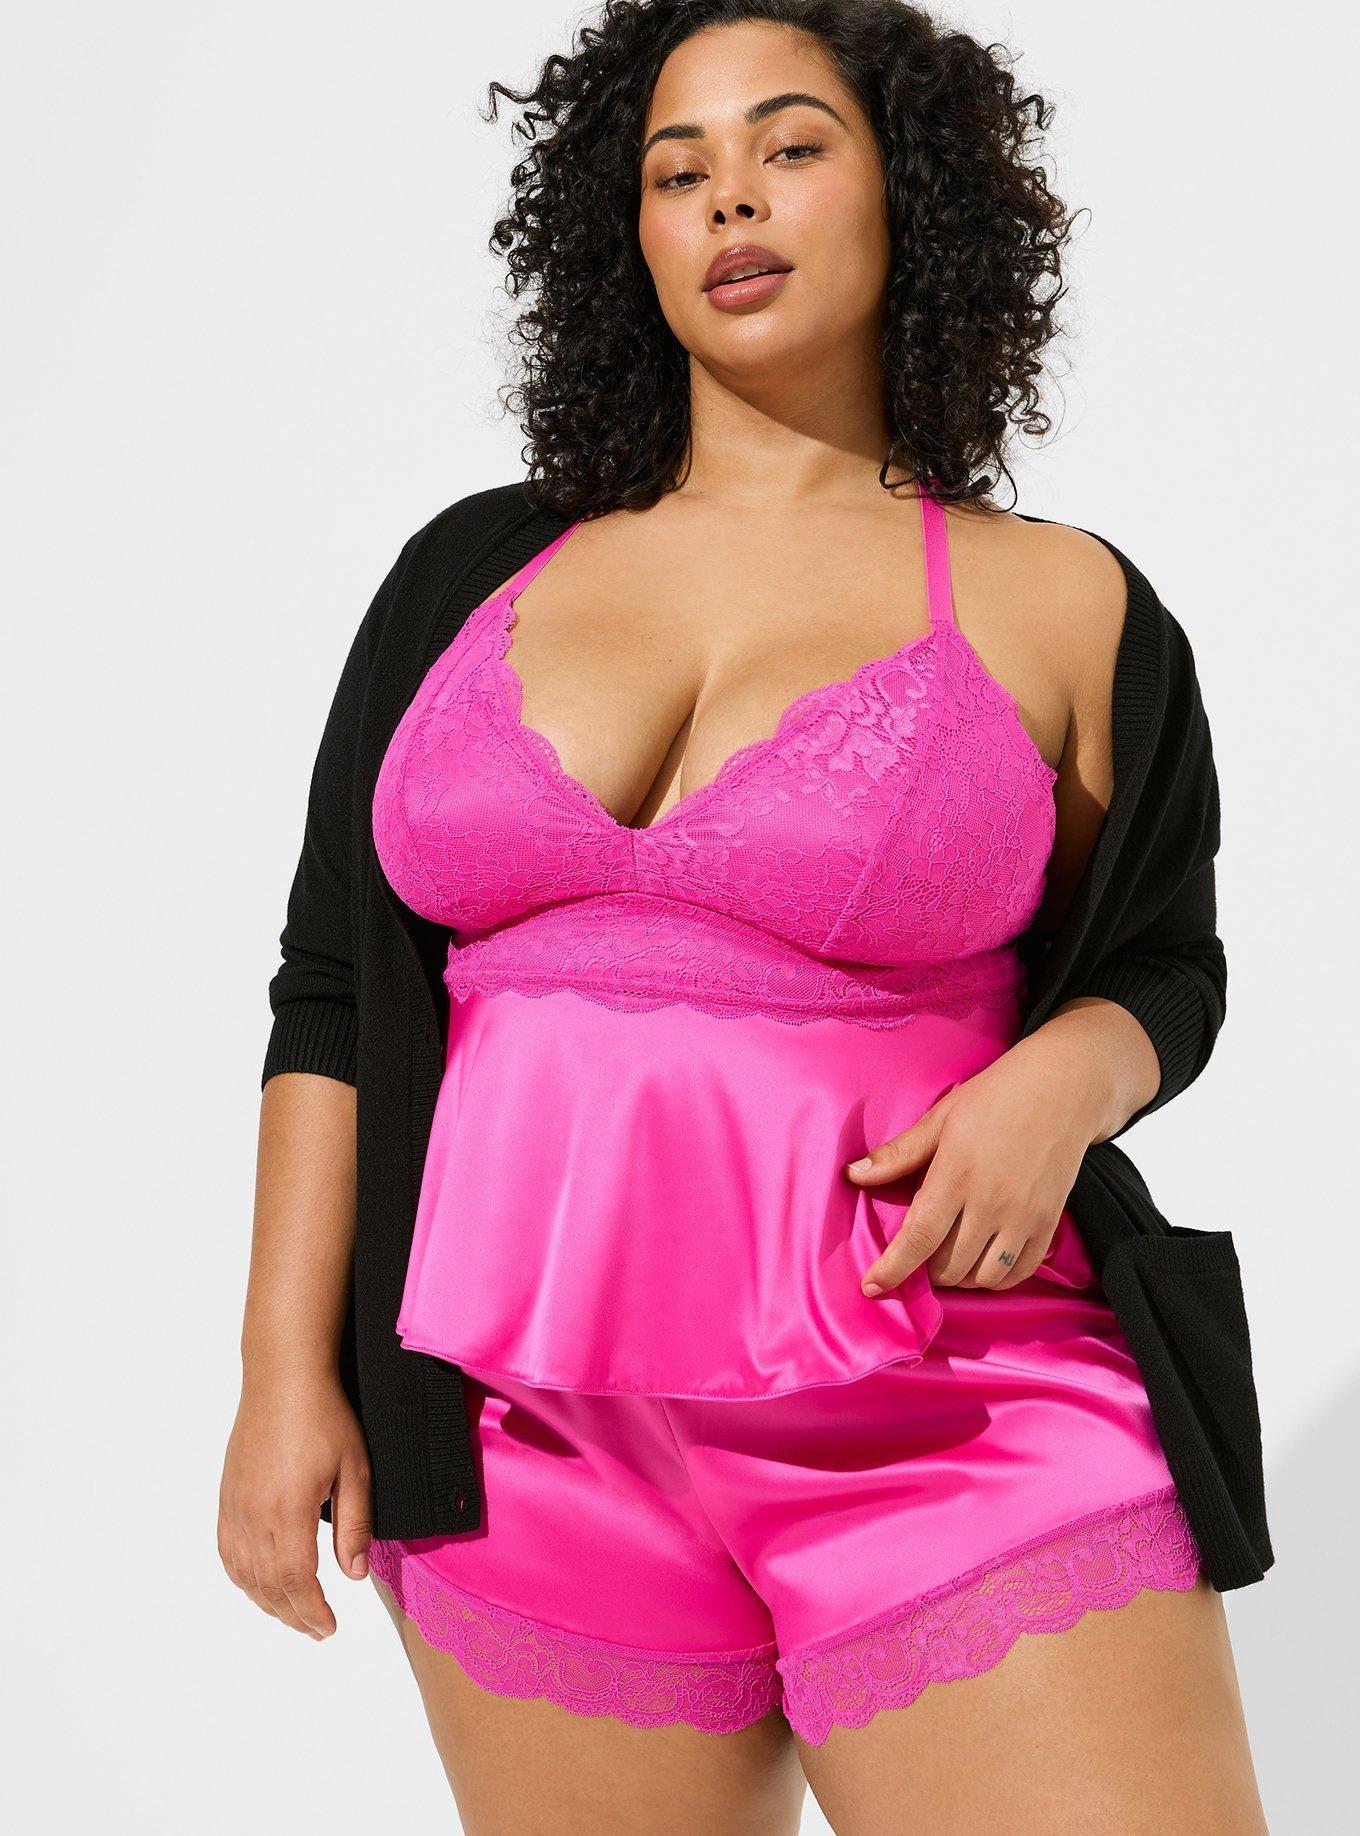 Plus Size Pajamas and Loungewear for Women